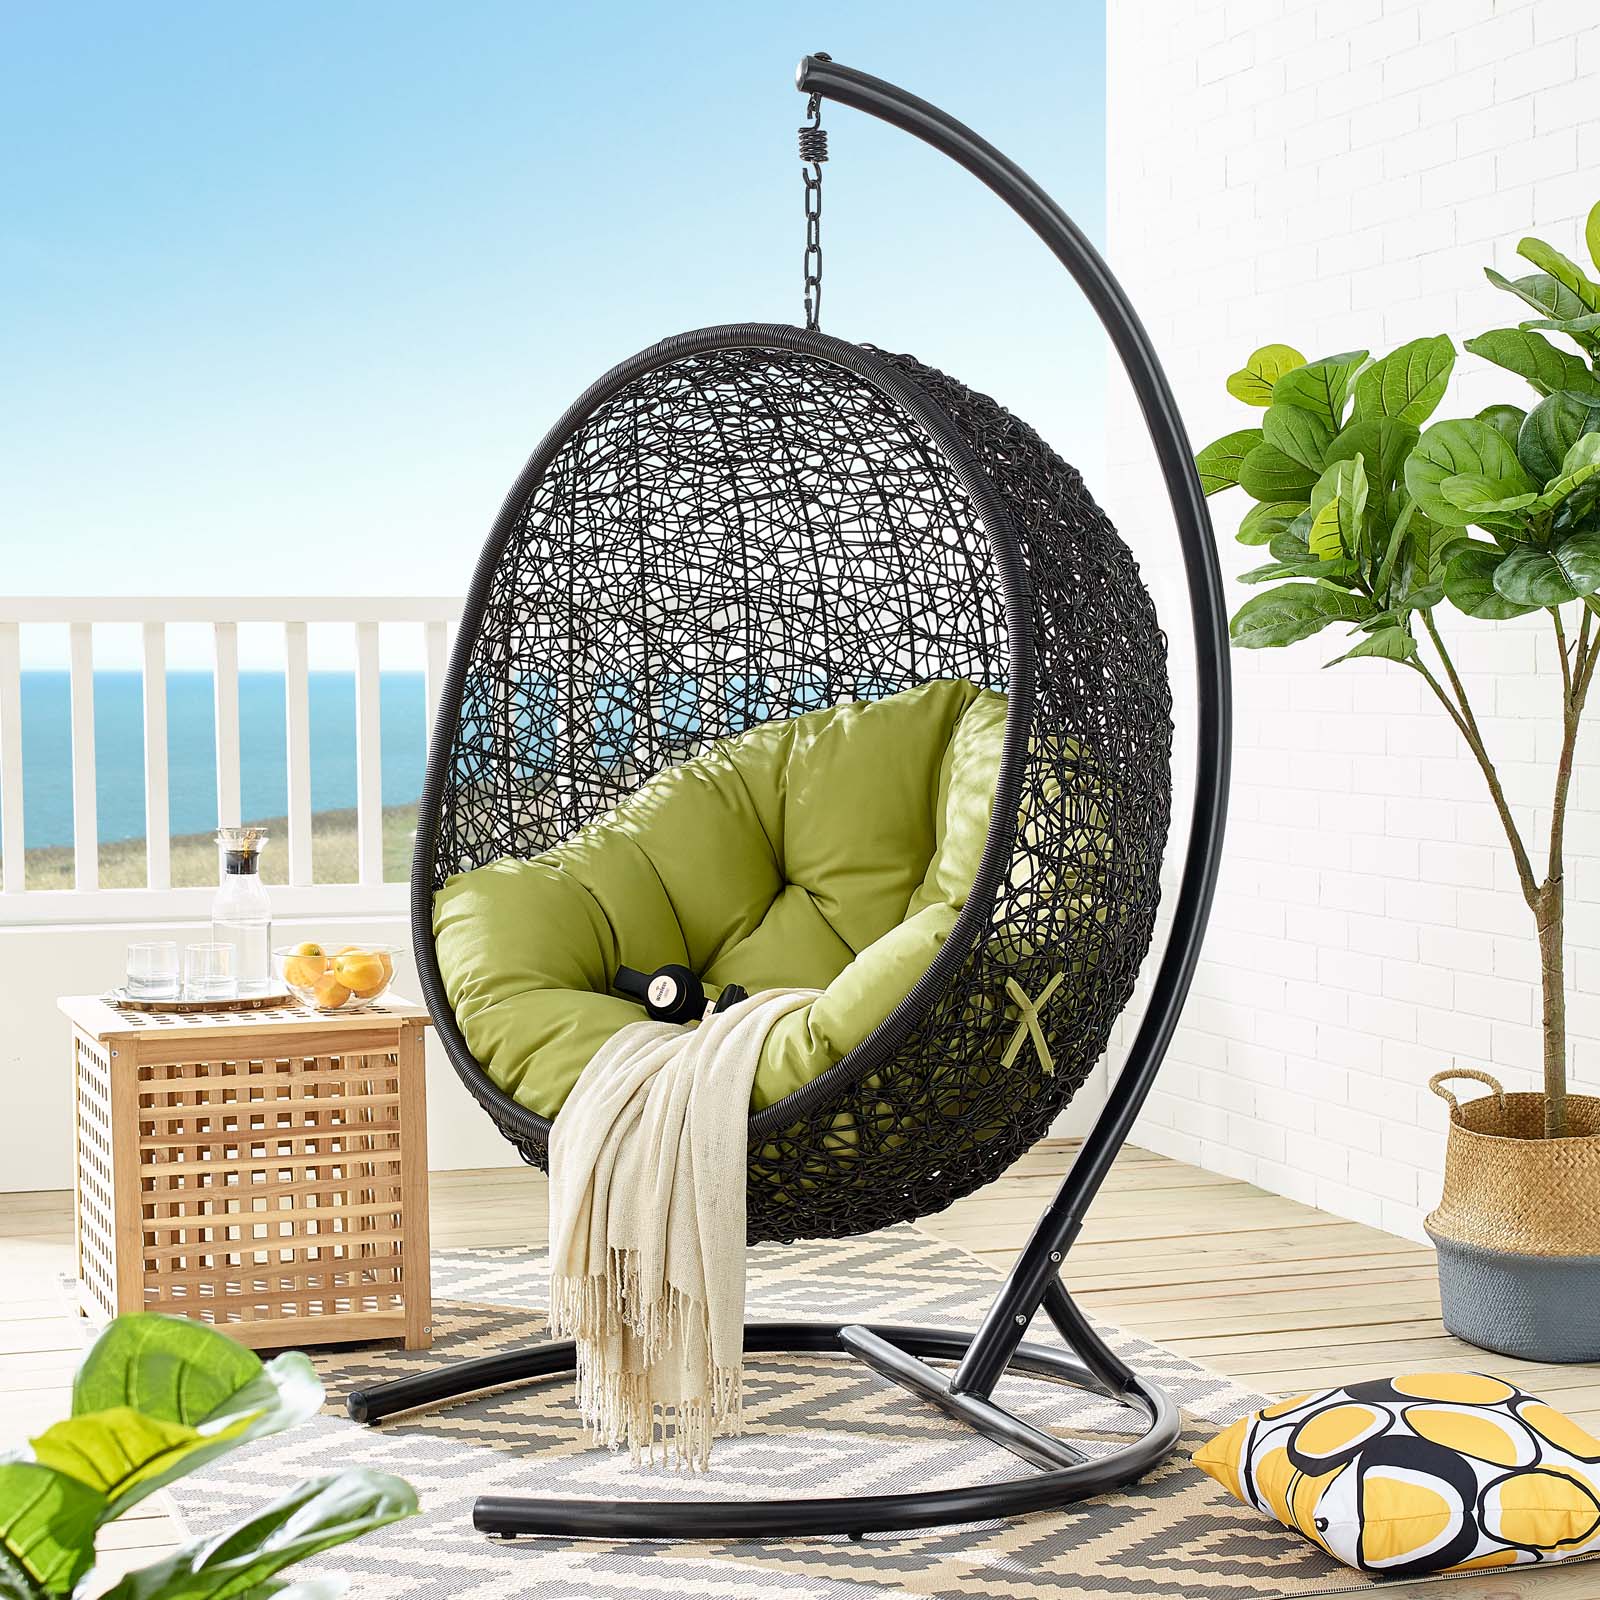 Modway Encase Swing Outdoor Patio Lounge Chair in Peridot - image 1 of 8